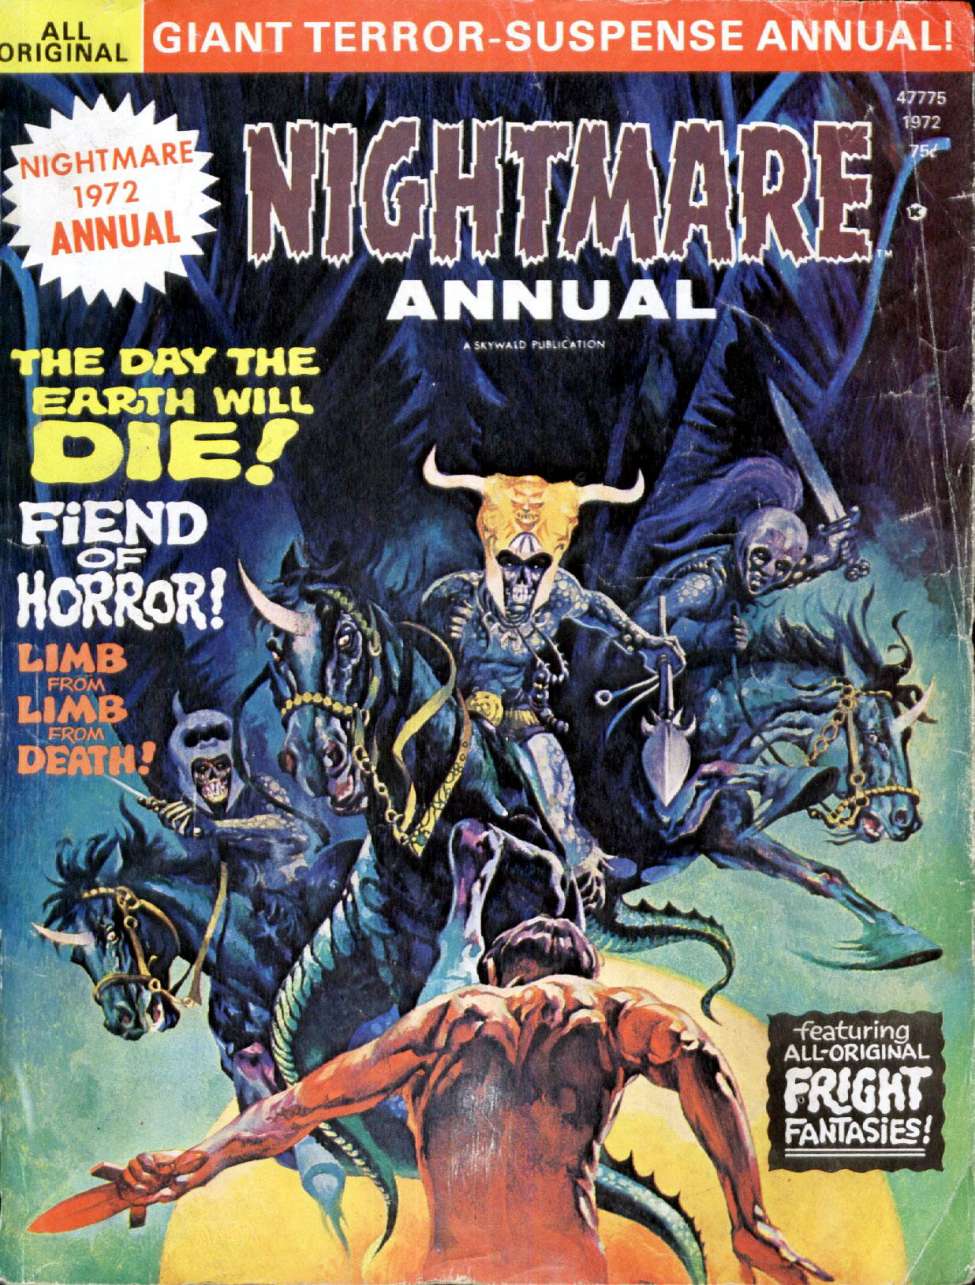 Book Cover For Nightmare 1972